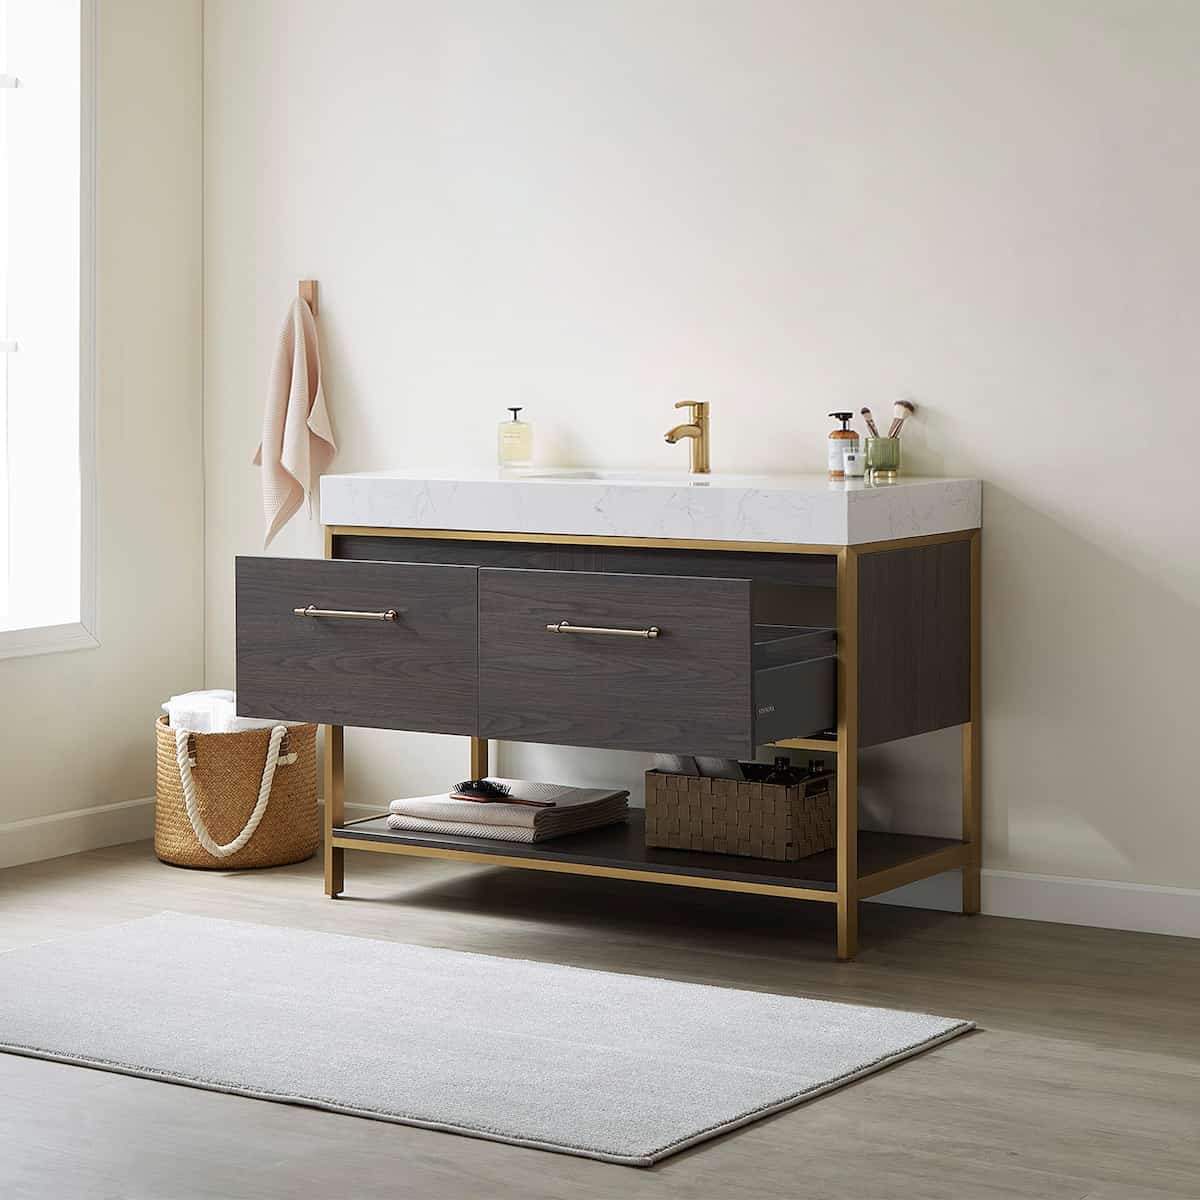 Vinnova Palma 48 Inch Freestanding Single Sink Bath Vanity in Suleiman Oak With White Composite Grain Stone Countertop Without Mirror Drawers 701248G-SO-GW-NM